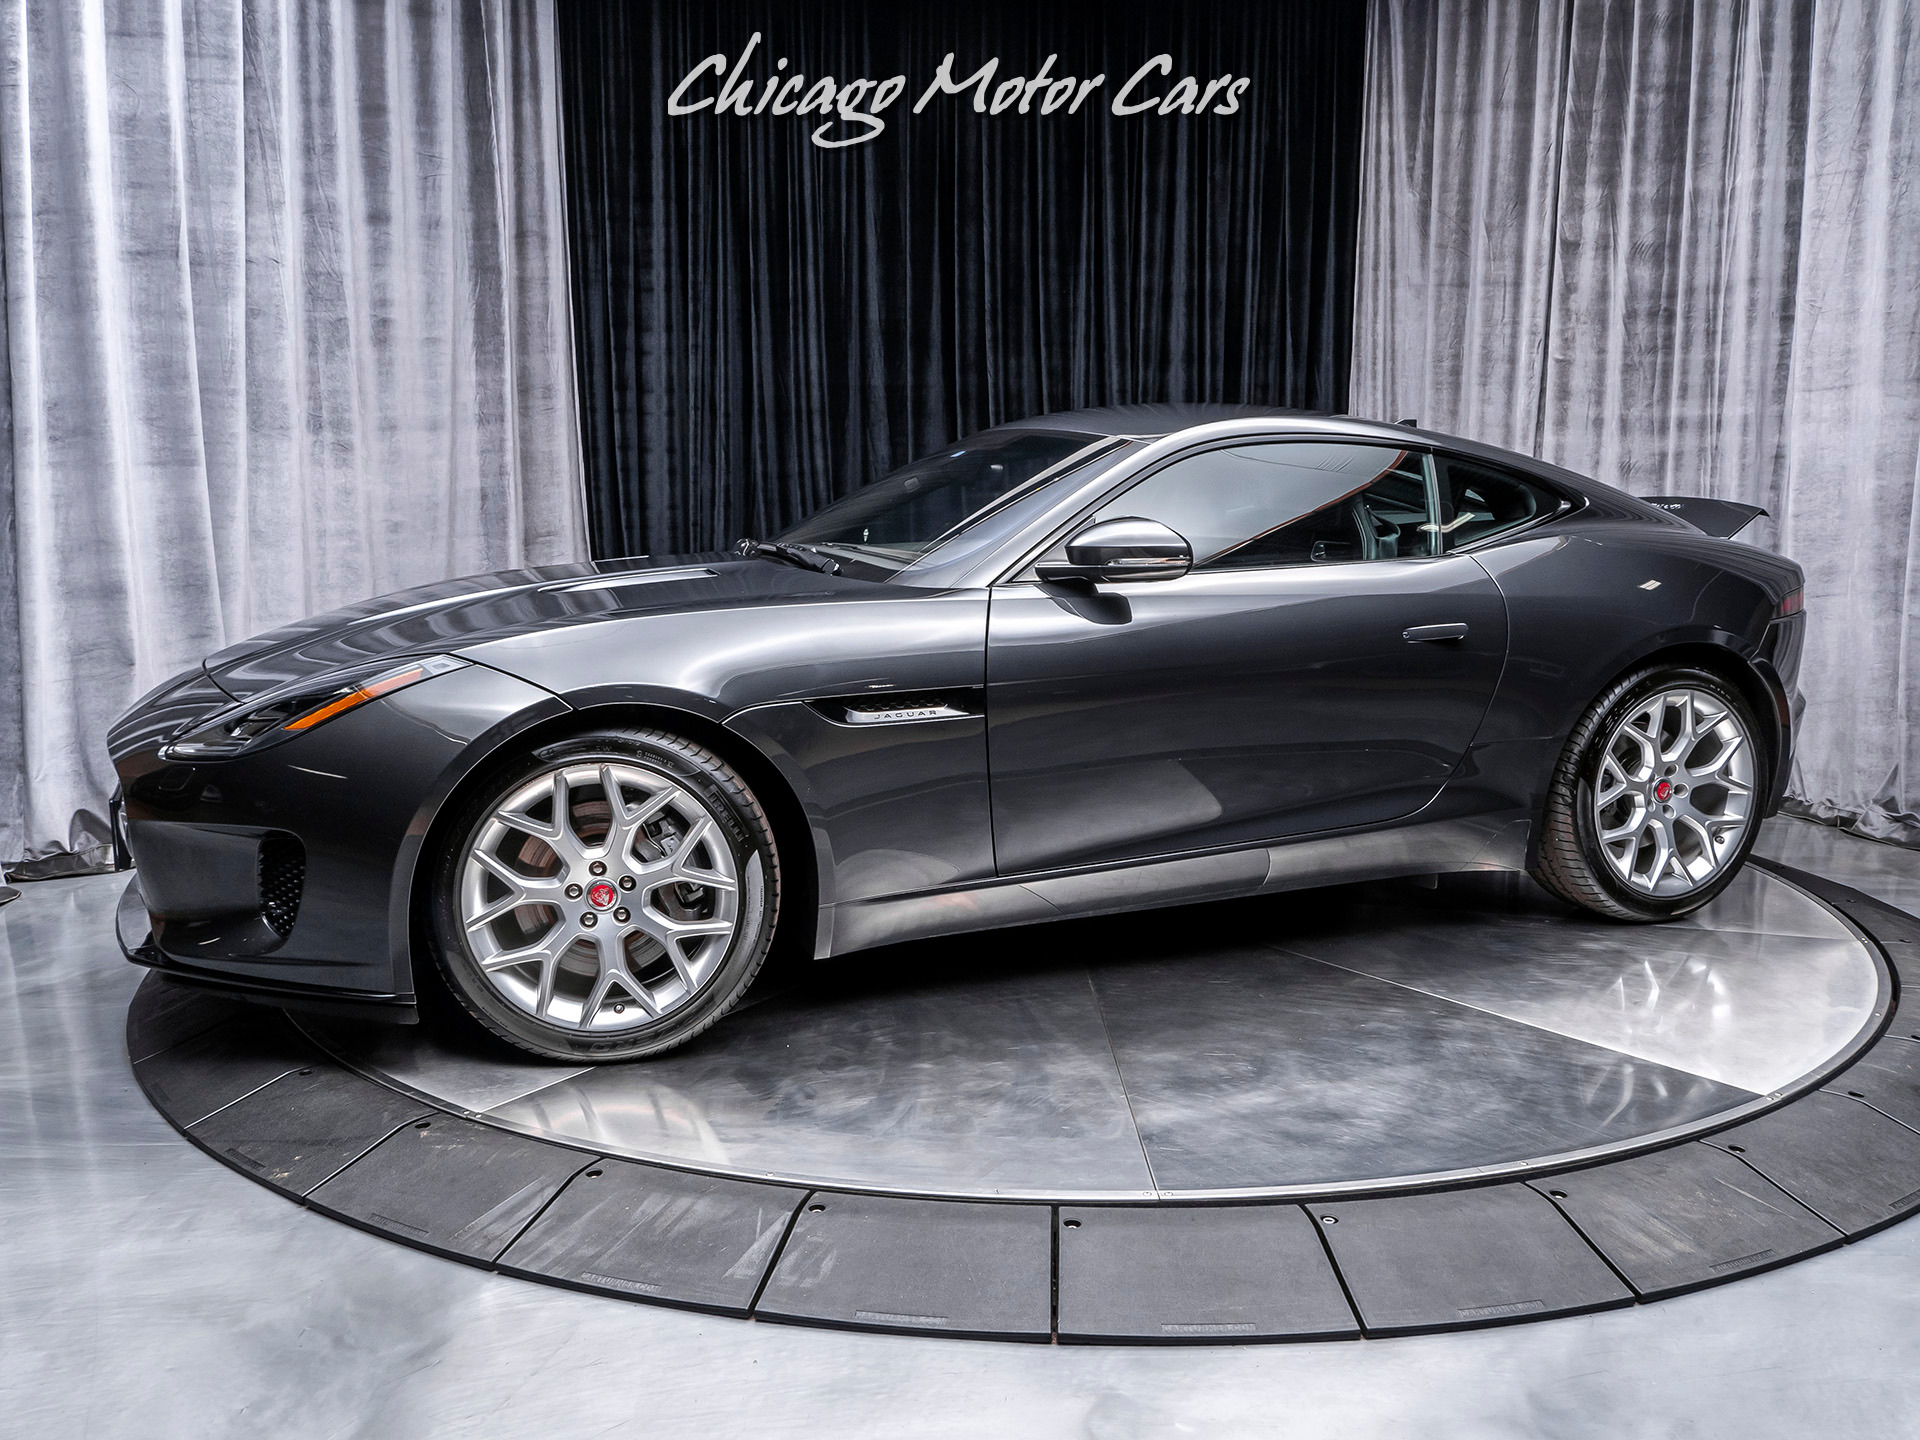 Used 2018 Jaguar F-TYPE 350hp Coupe PREMIUM LEATHER INTERIOR! For Sale  (Special Pricing) | Chicago Motor Cars Stock #16023